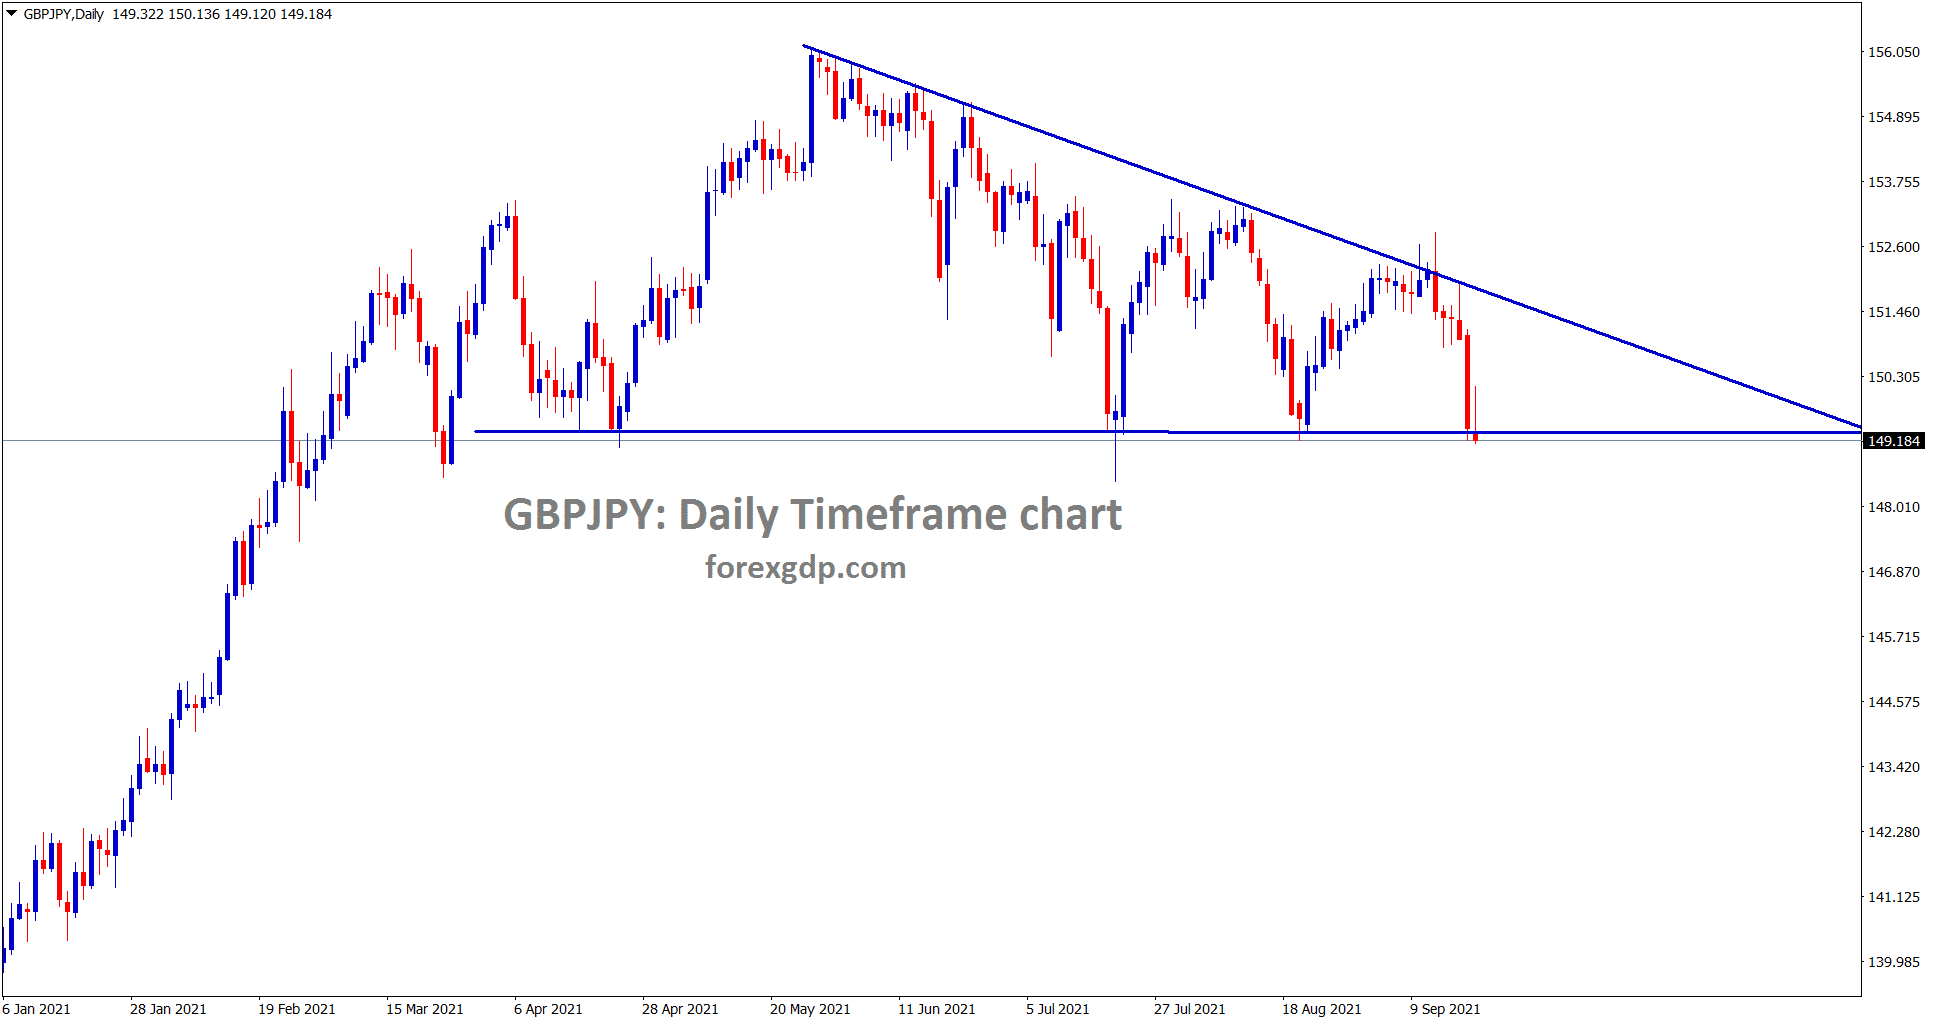 GBPJPY is standing exactly at the support area of descending triangle pattern